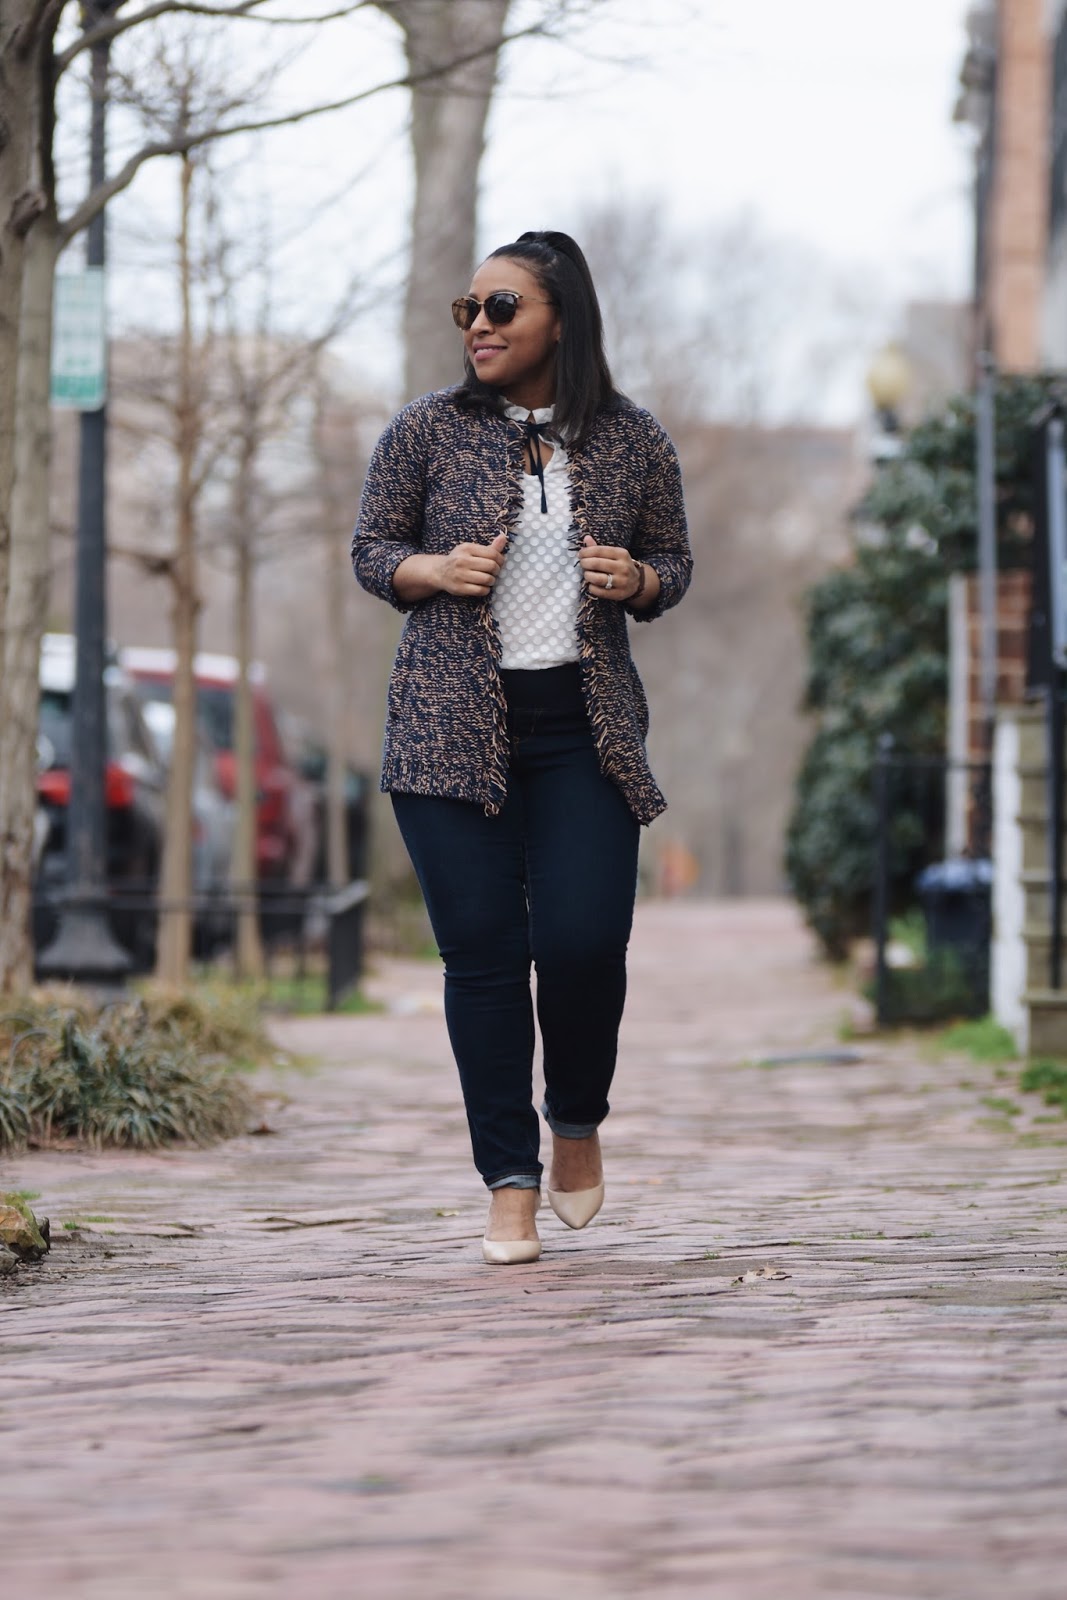 pregnant style, fossil bag, pregnant and stylish, thredup, dc blogger, mom blogger, cherry blossom, DC